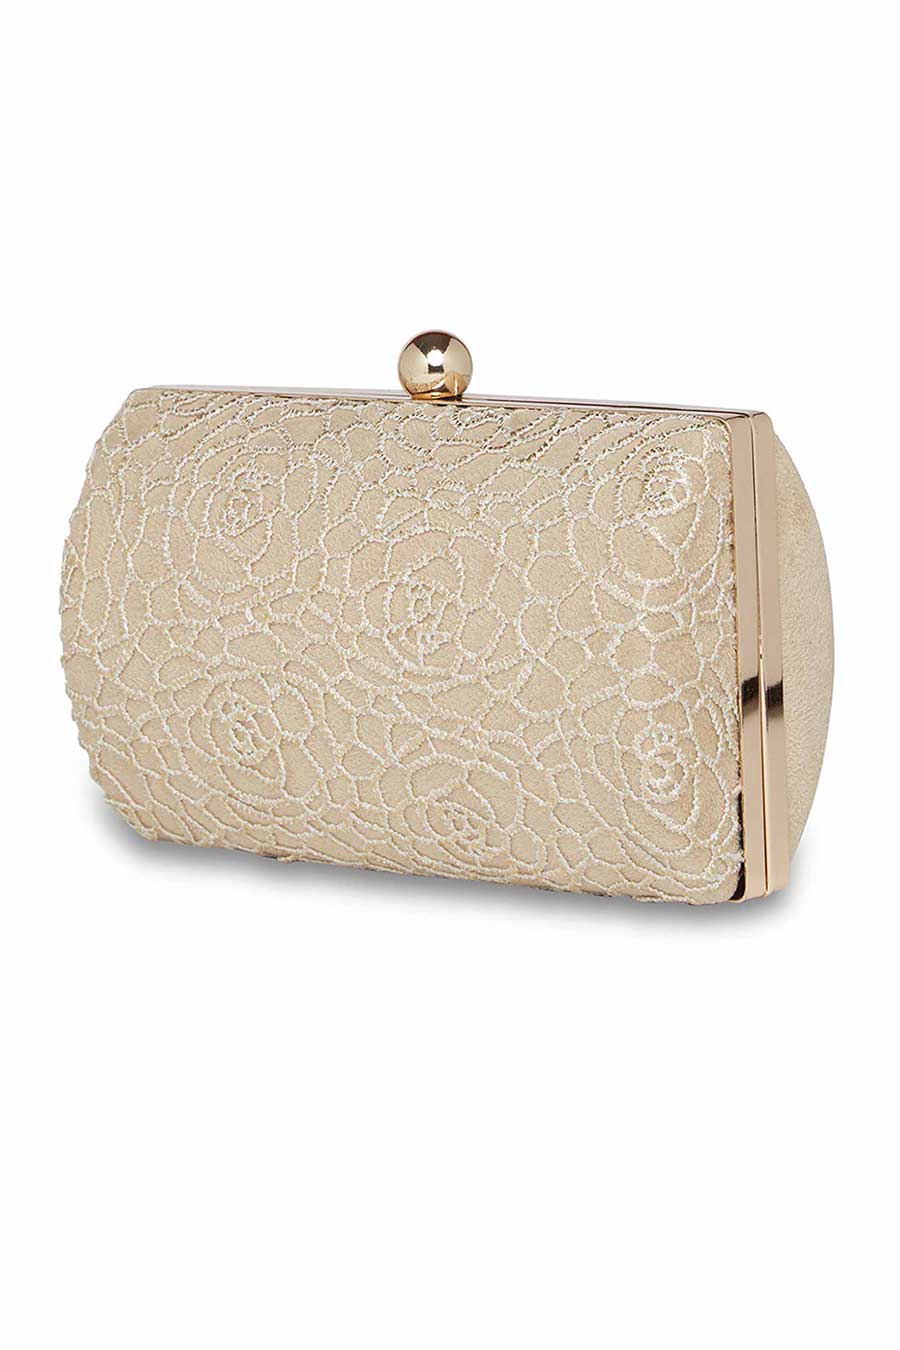 White & Gold Rose Lace Clutch